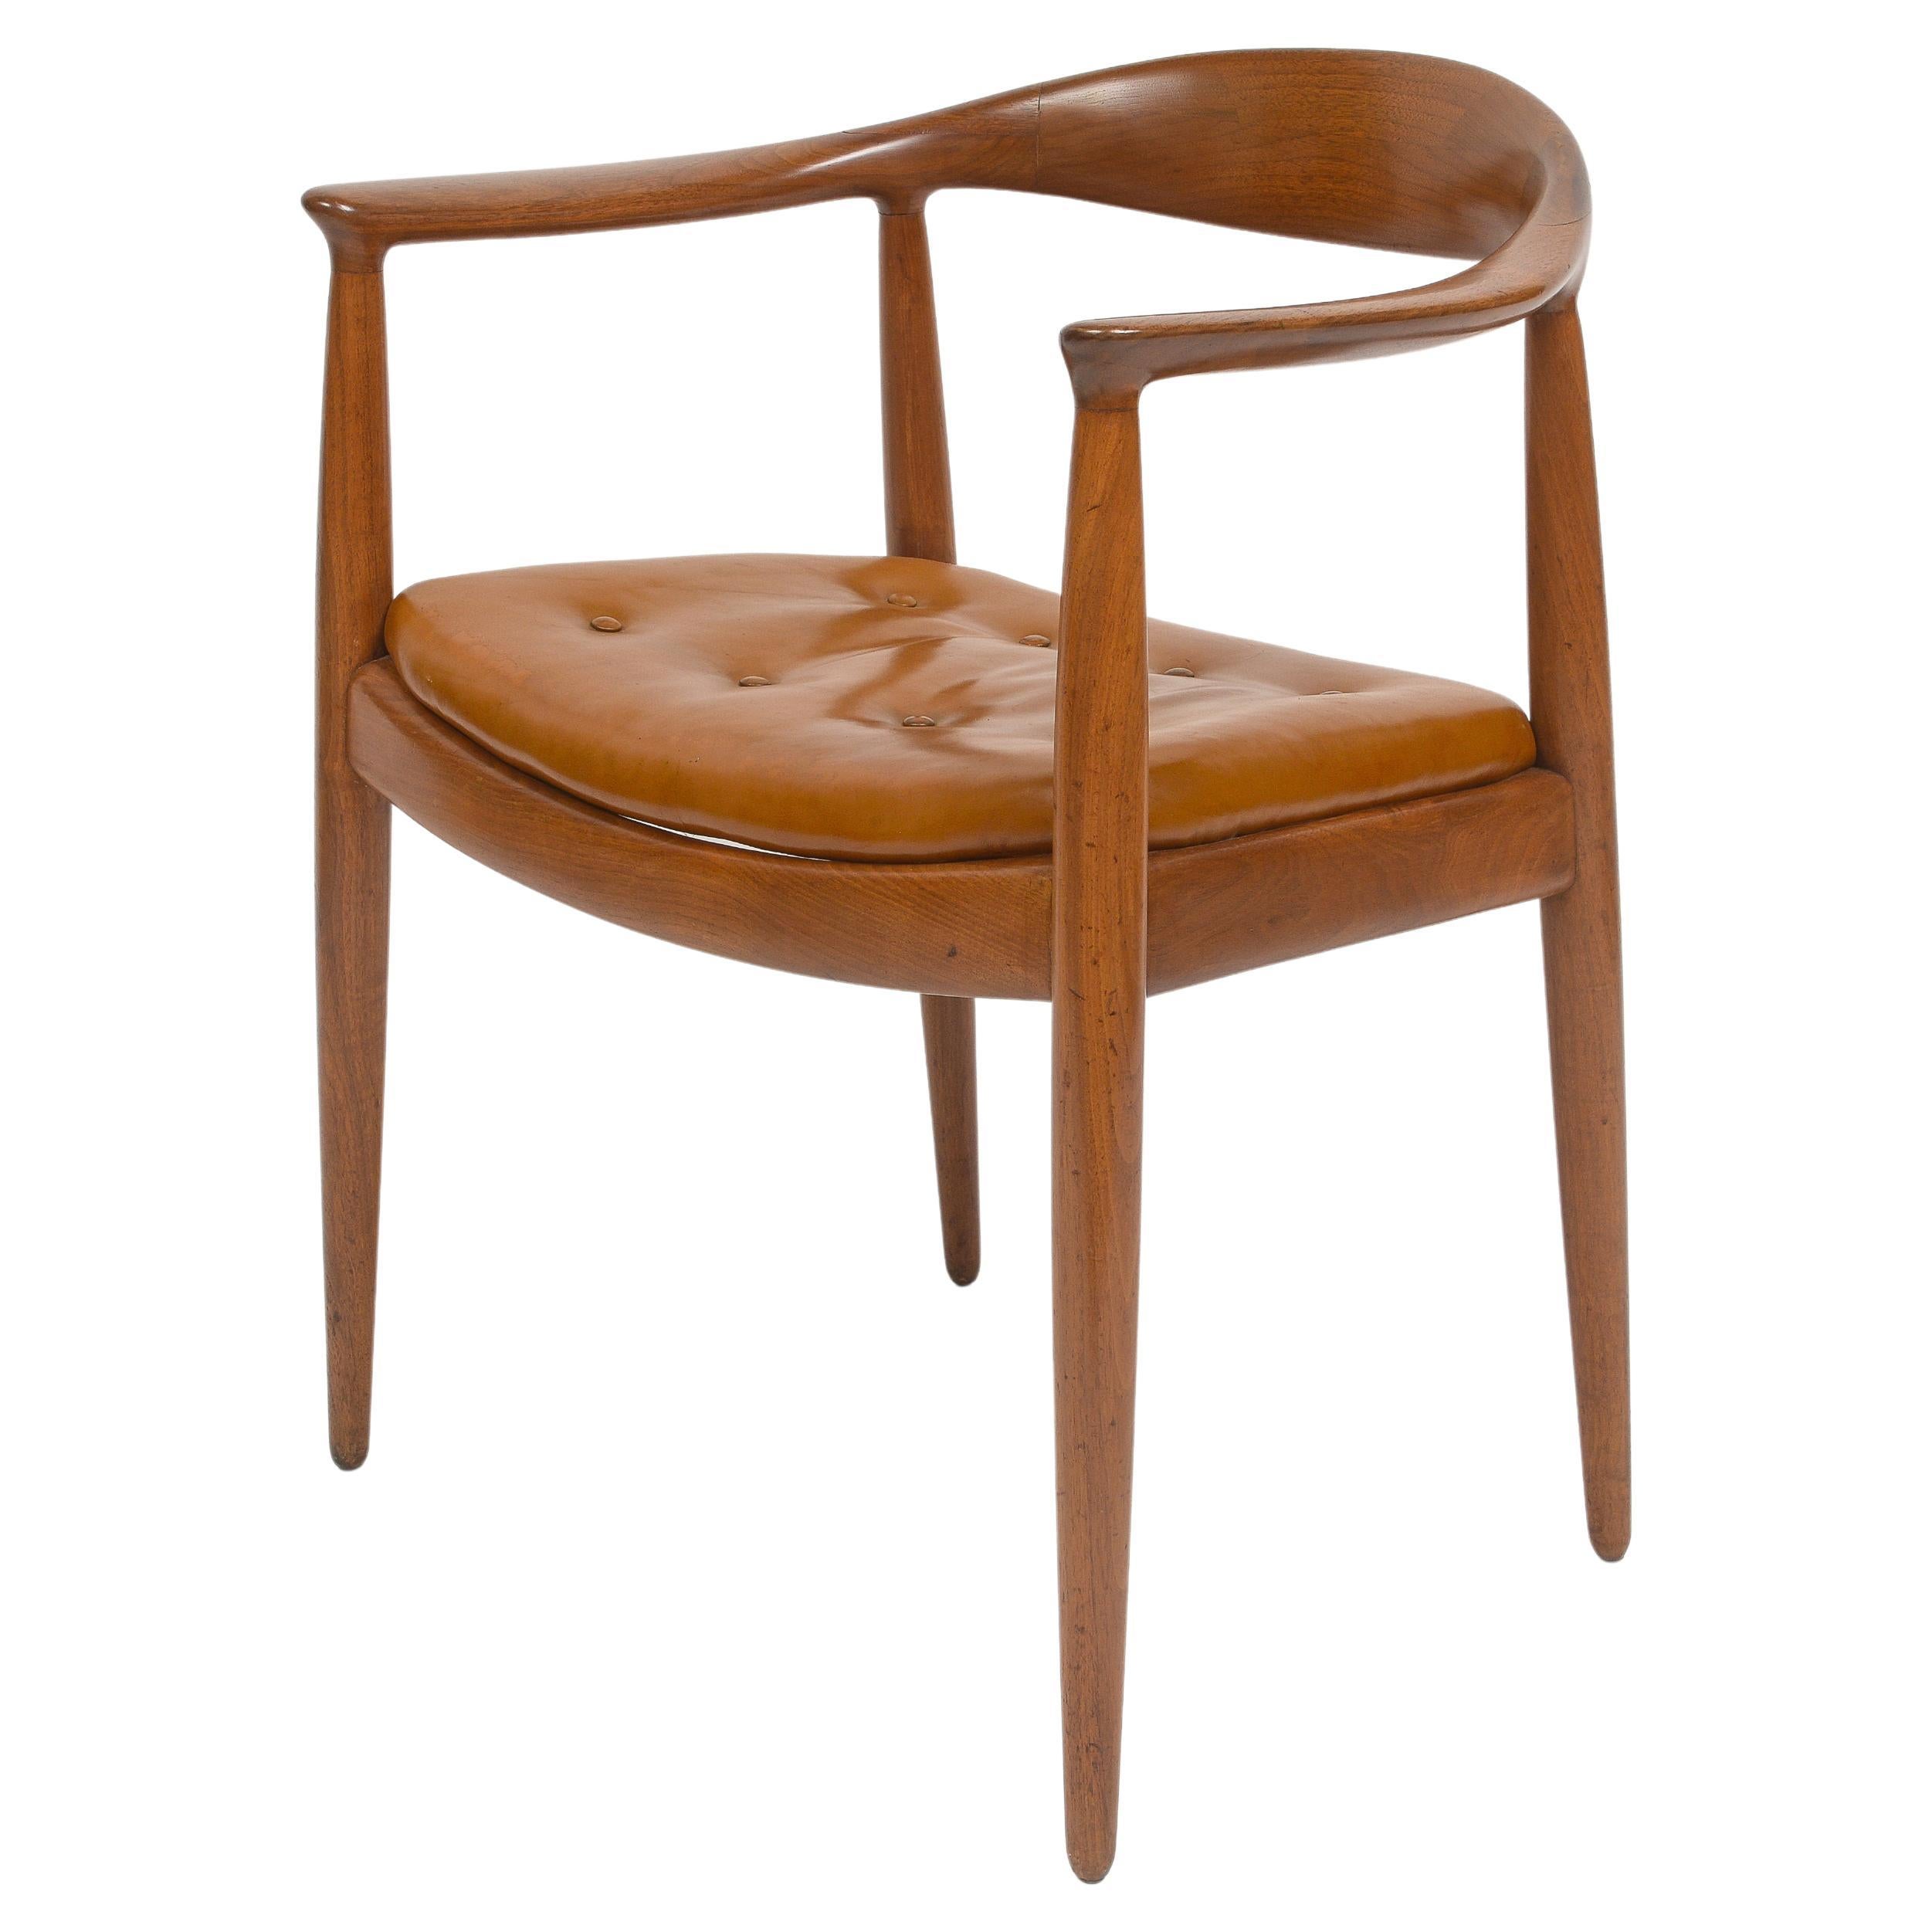 Contemporary 1960s Style Danish Modern Armchair For Sale